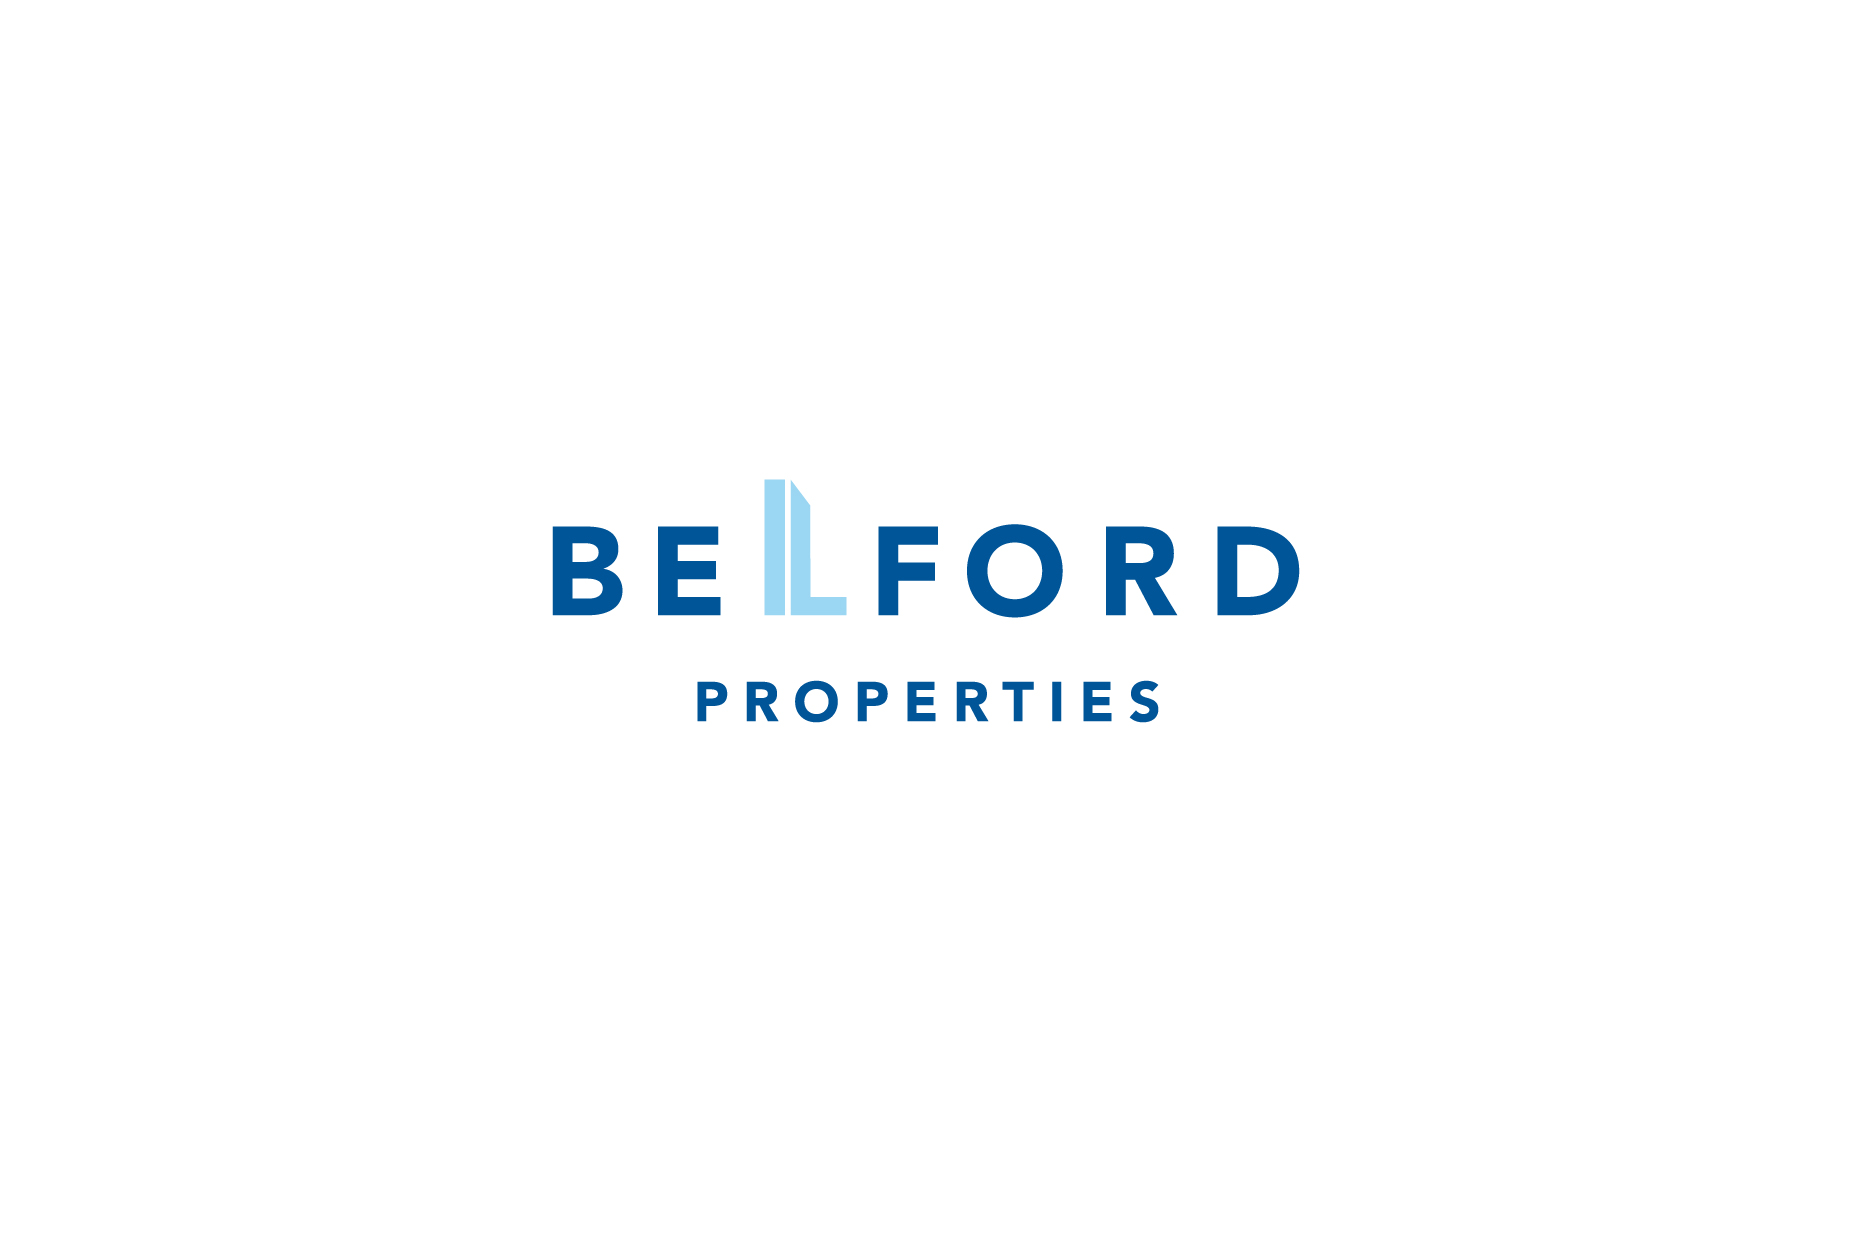 Belford's logo that will be featured on the hoarding project with the children's art